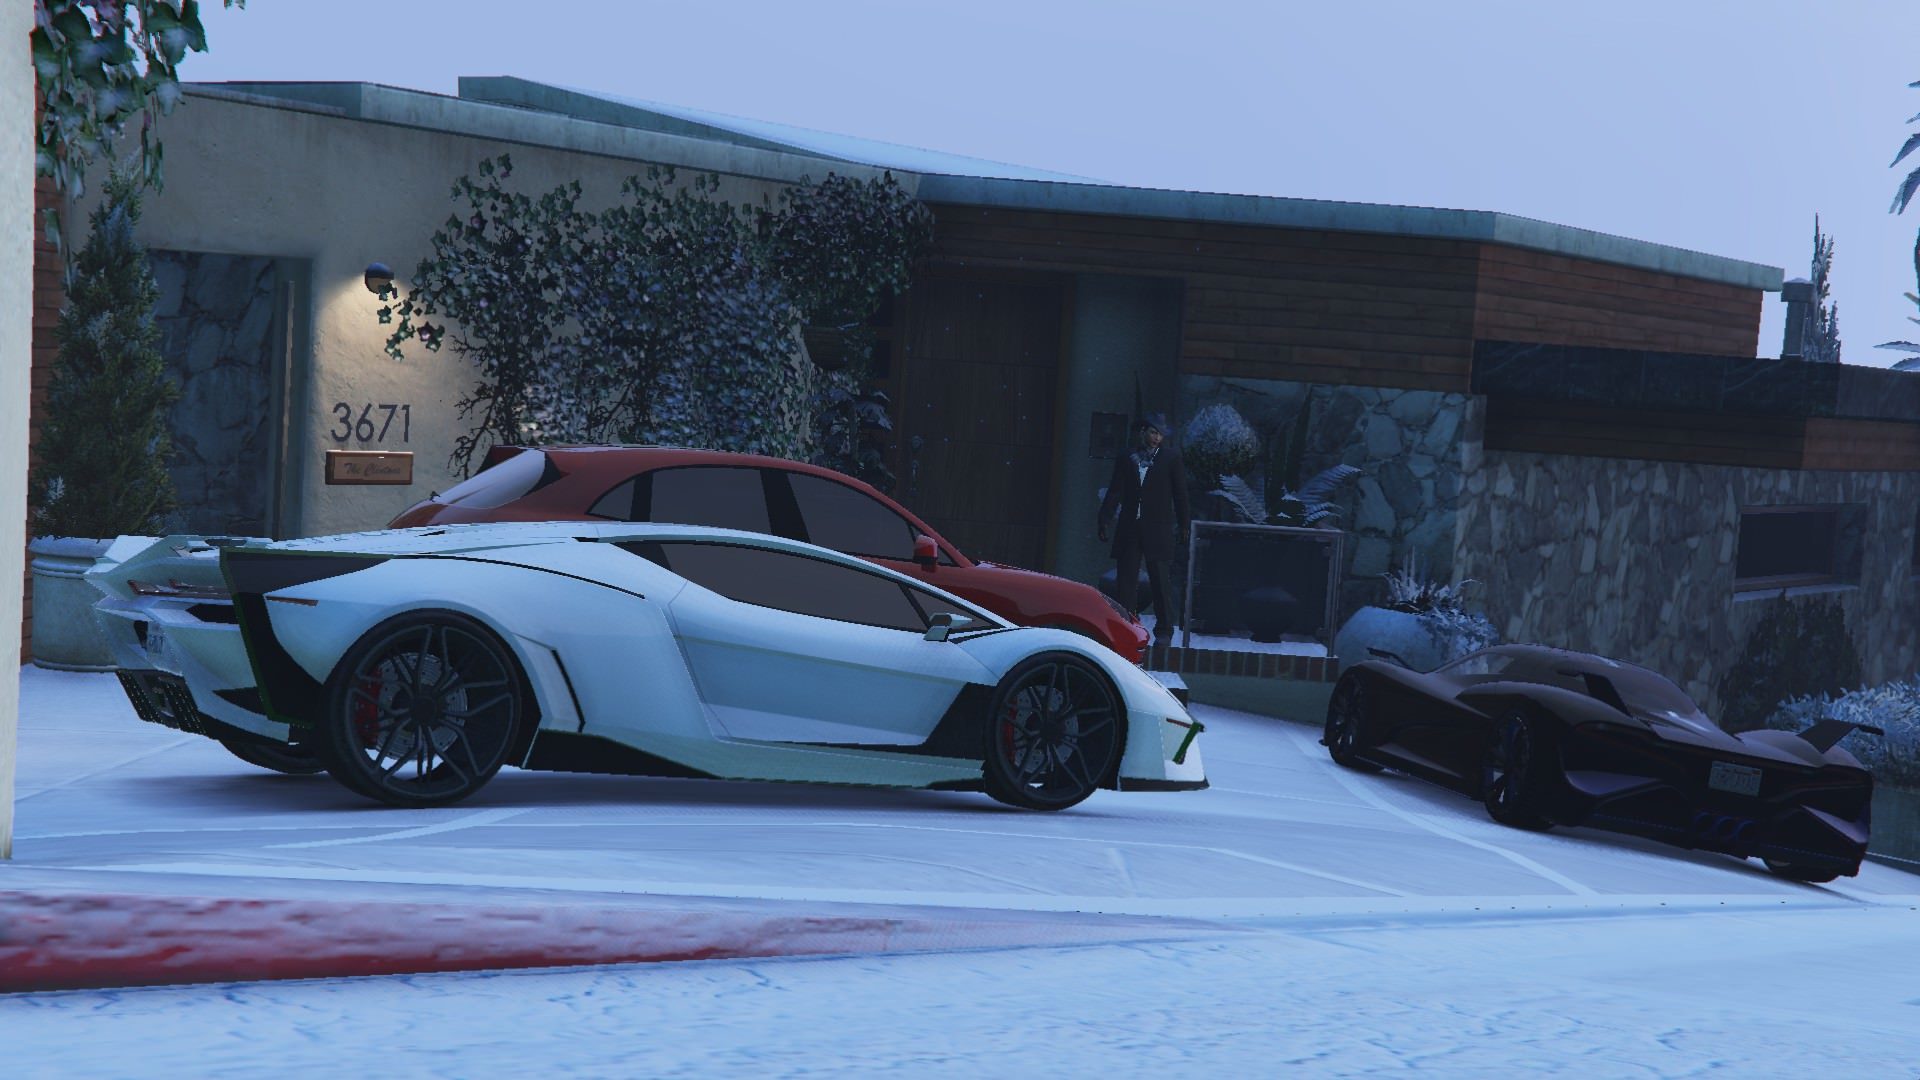 Visiting fellow co-worker Franklin on an icy Los Santos day 3